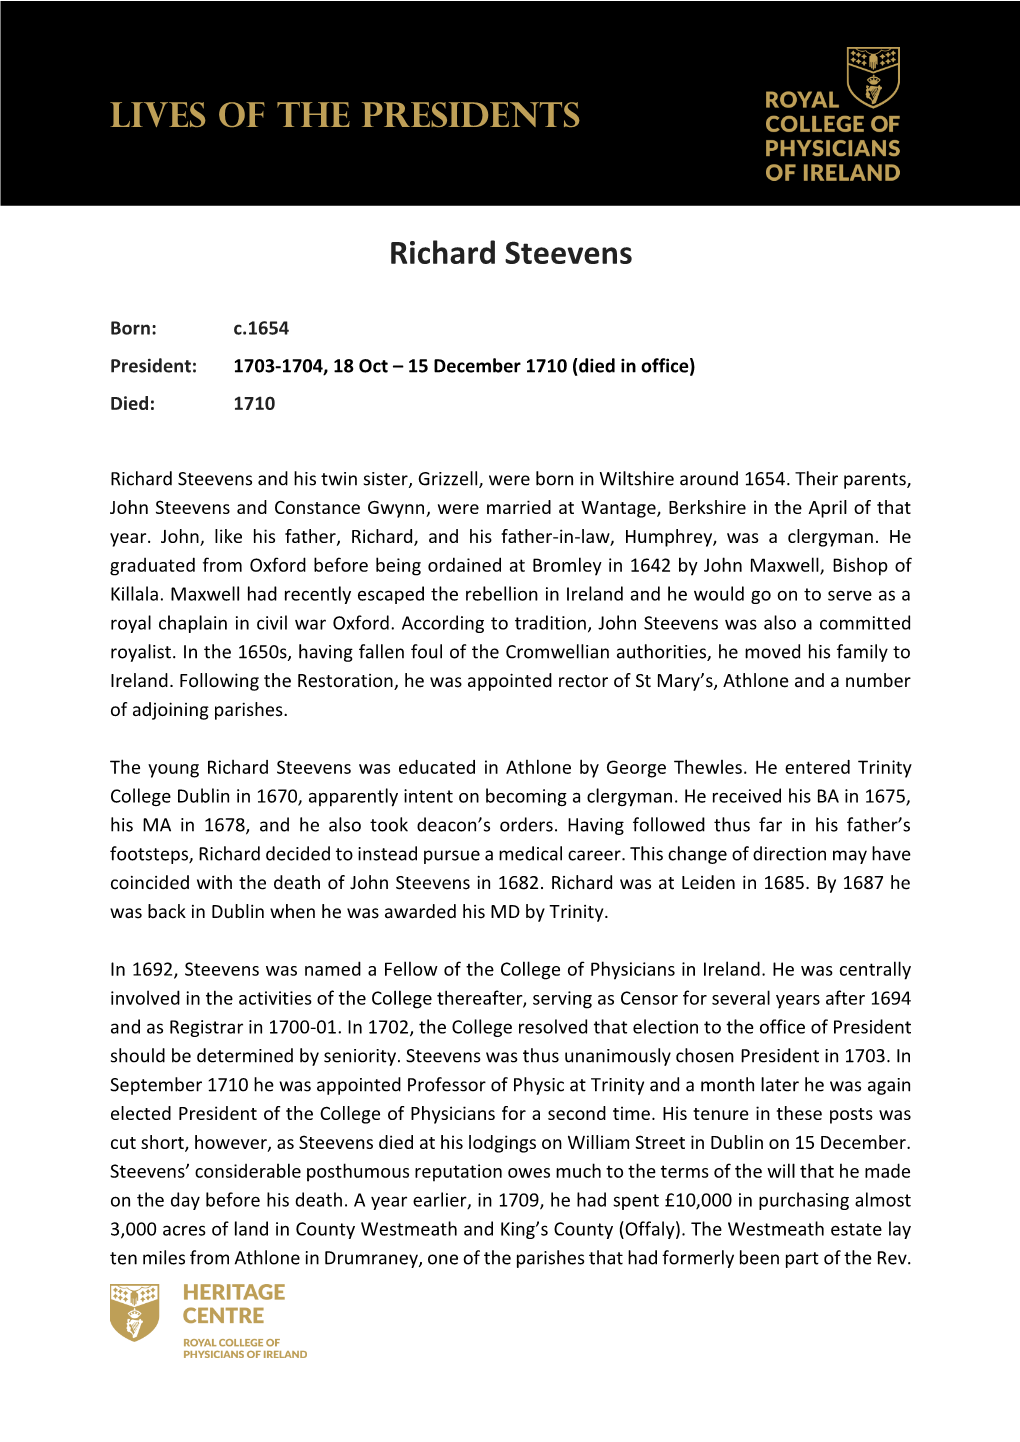 LIVES of the PRESIDENTS Richard Steevens